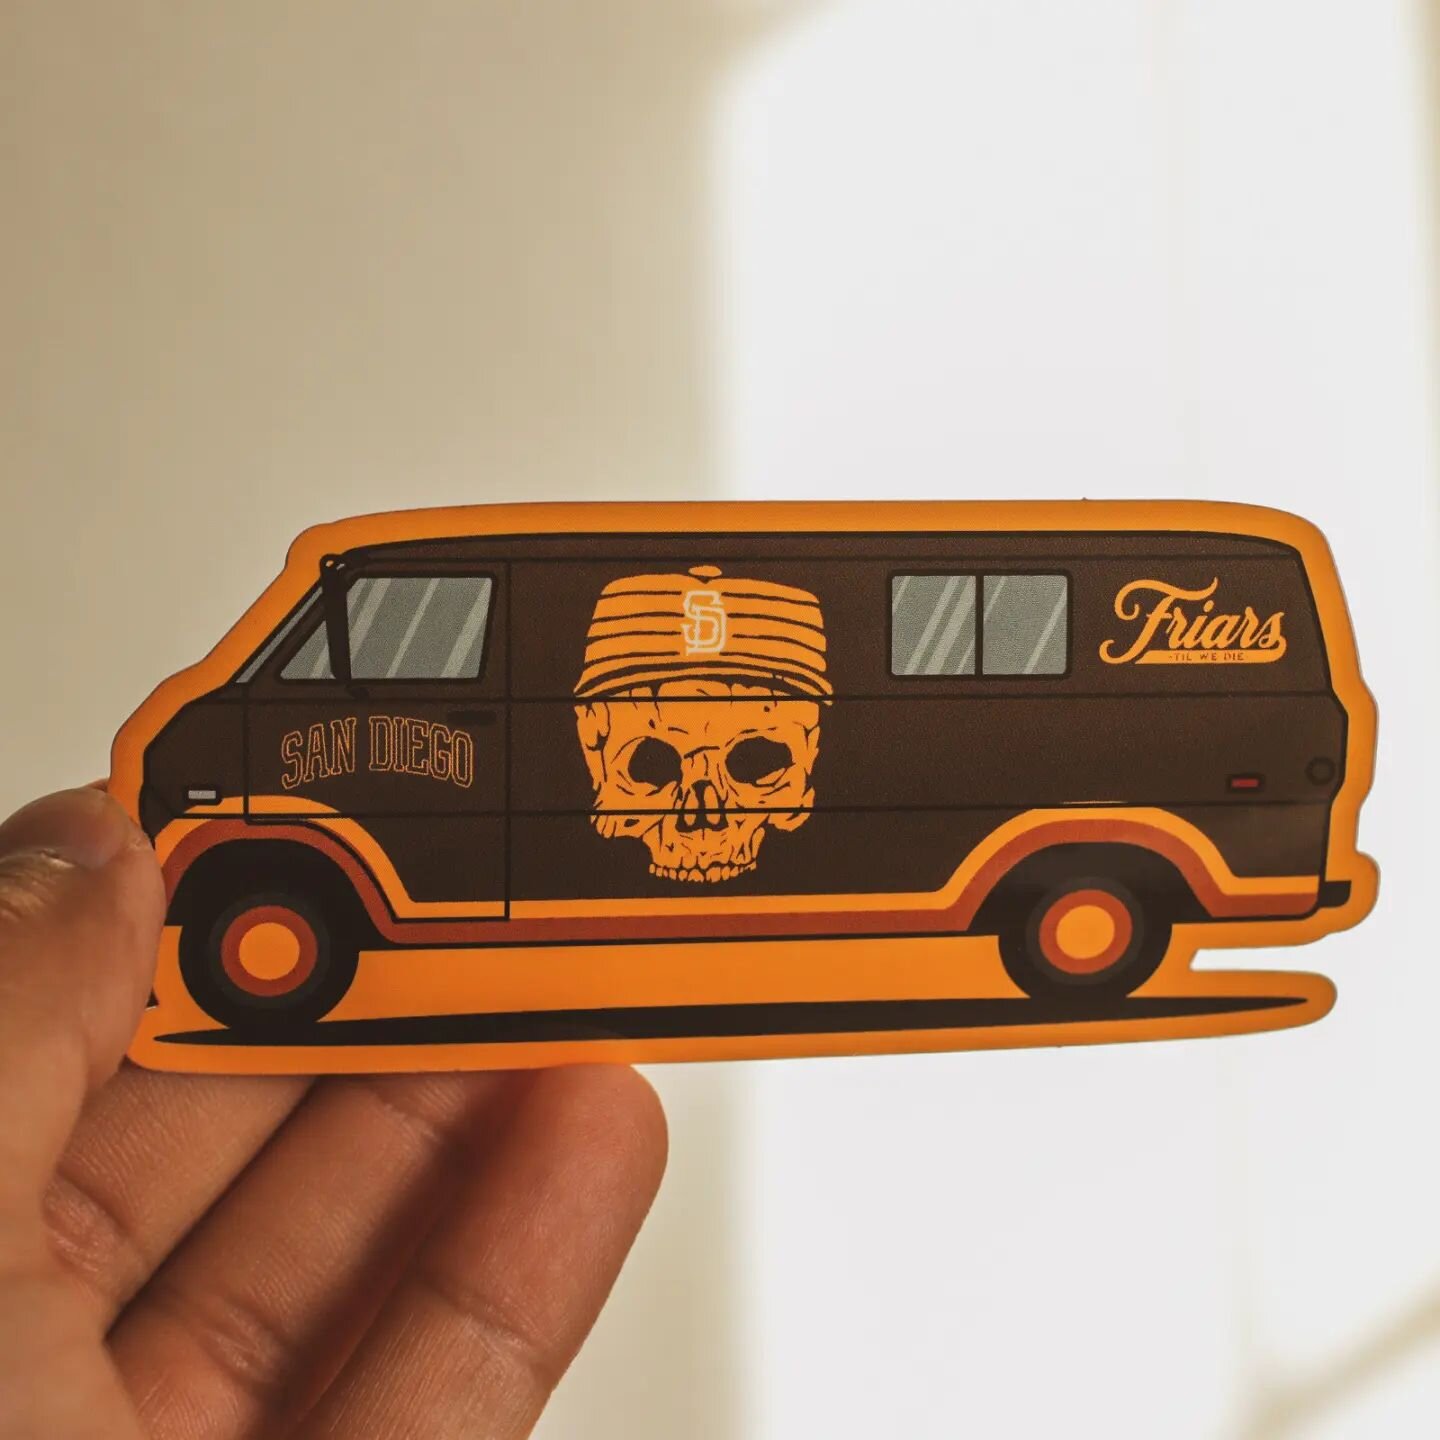 Lots of Friar Van stickers have been going out with your orders! Available on friarstilwedie.com 💀🌴⚾

#friarstilwedie #friarfaithful #sandiegopadres #padres #daygo #sandiegobrand #slamdiego #hungryformore #petcopark